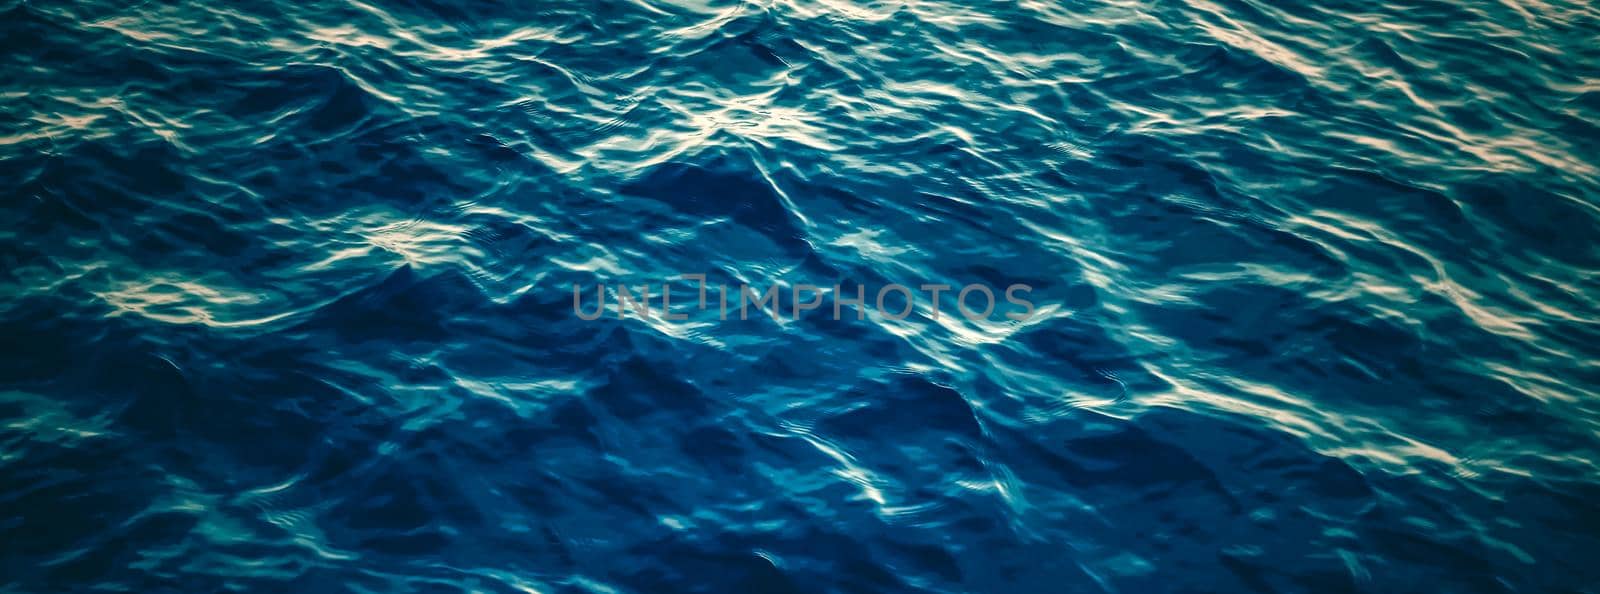 Deep blue ocean water texture, dark sea waves background as nature and environmental design by Anneleven